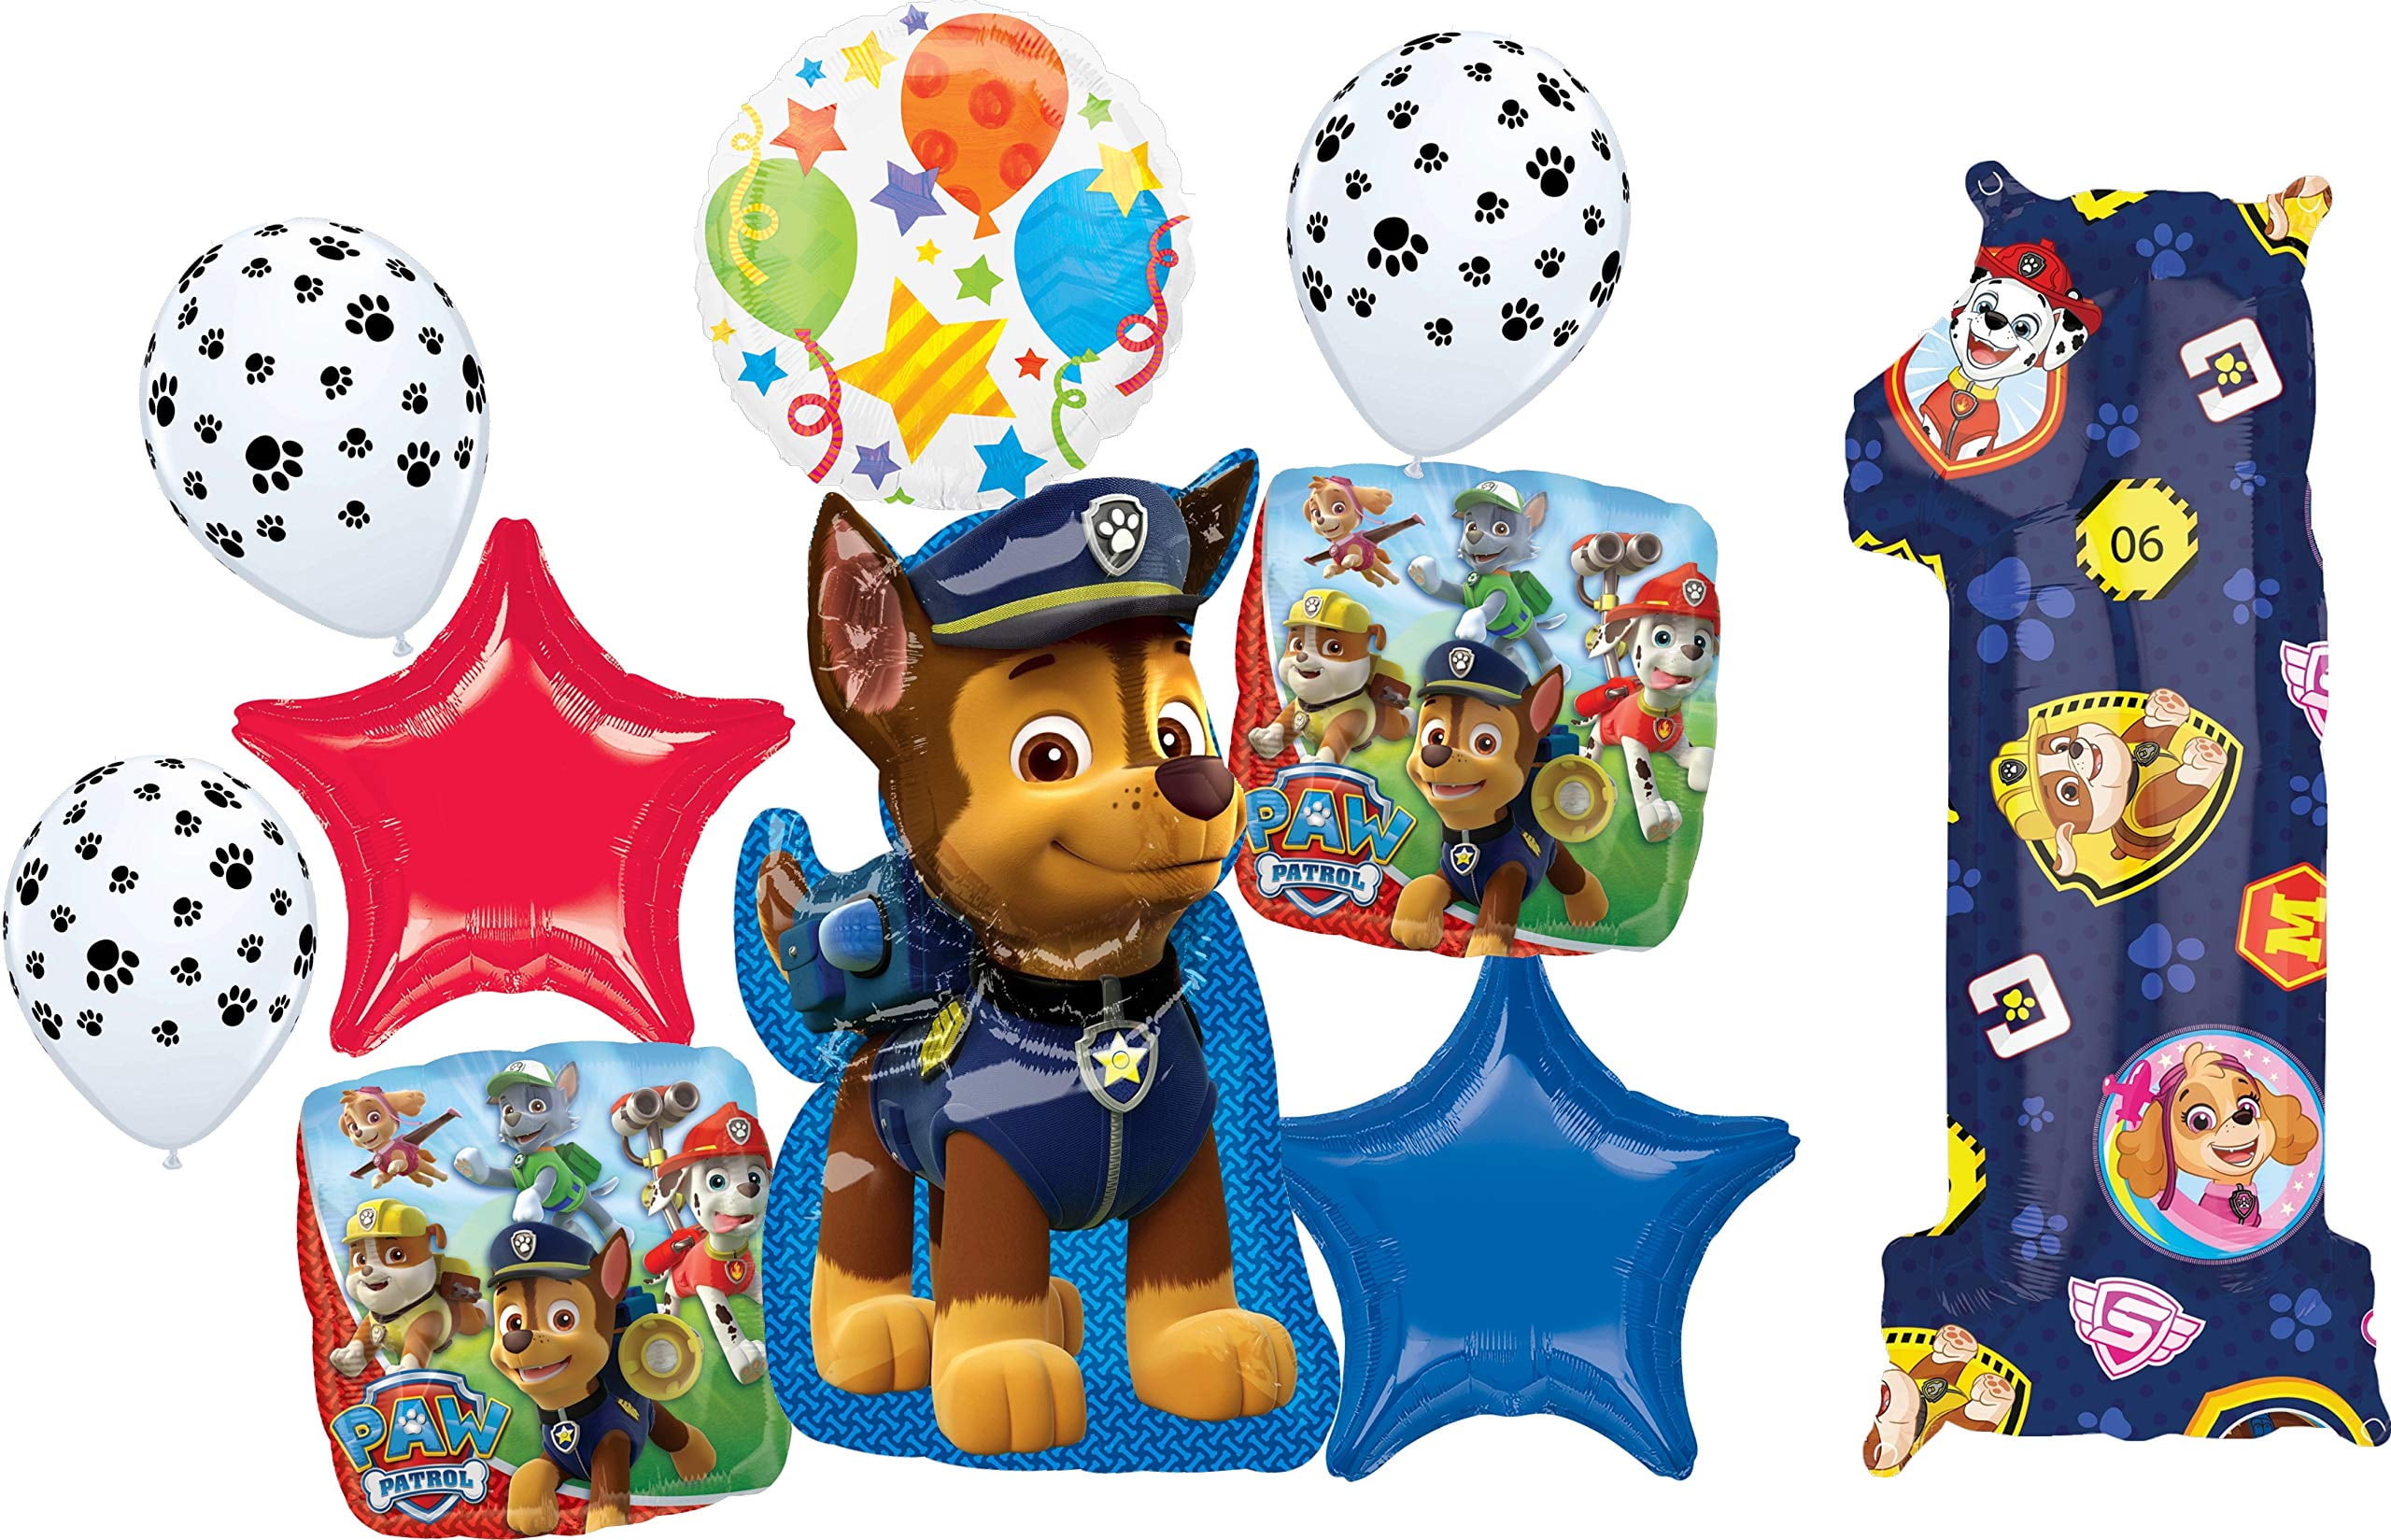 Details about  / Paw Patrol Party Decorations Paw Patrol Balloons Paw Patrol Birthday Decorations